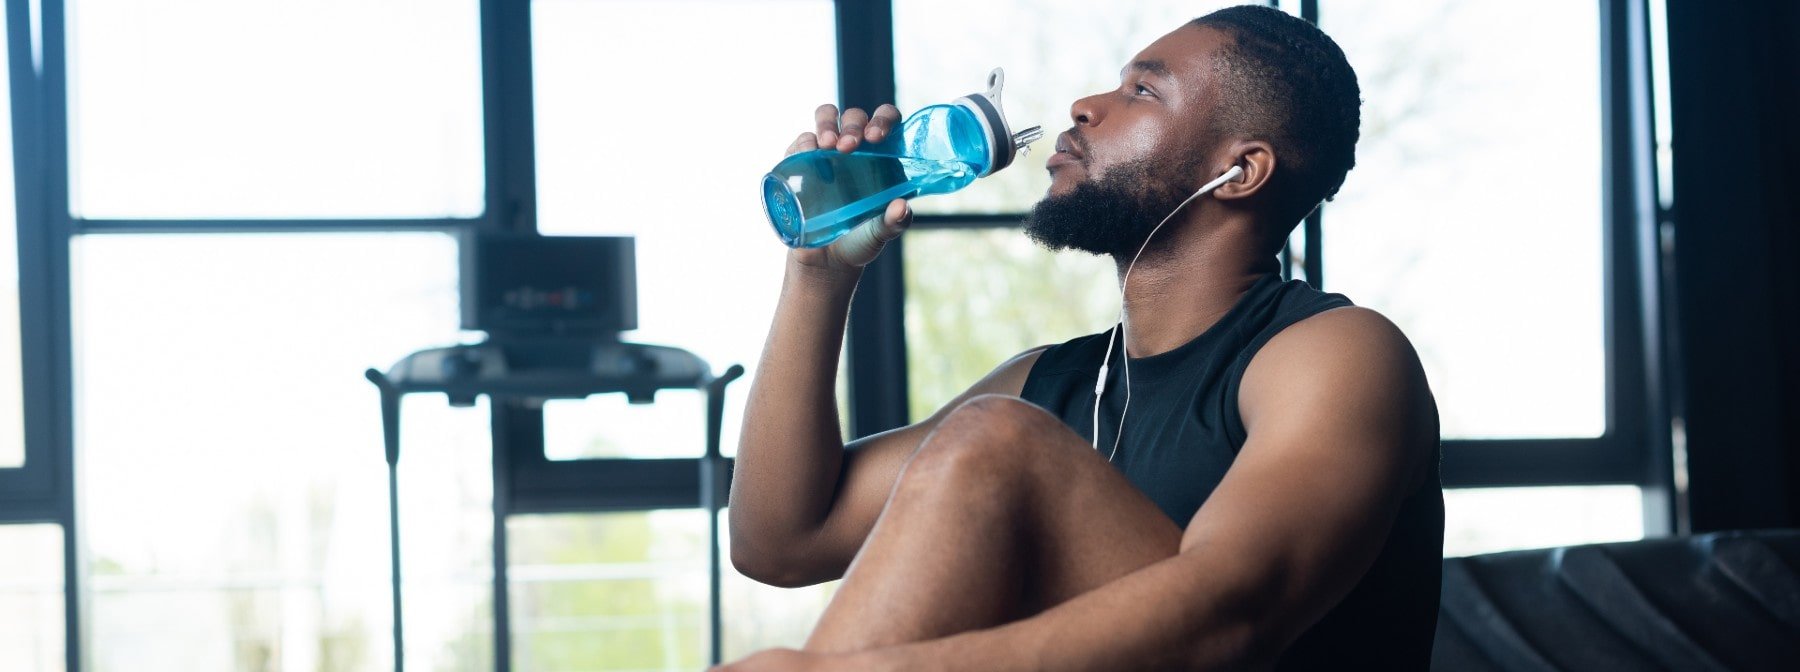 What Are BCAAs & Their Benefits?